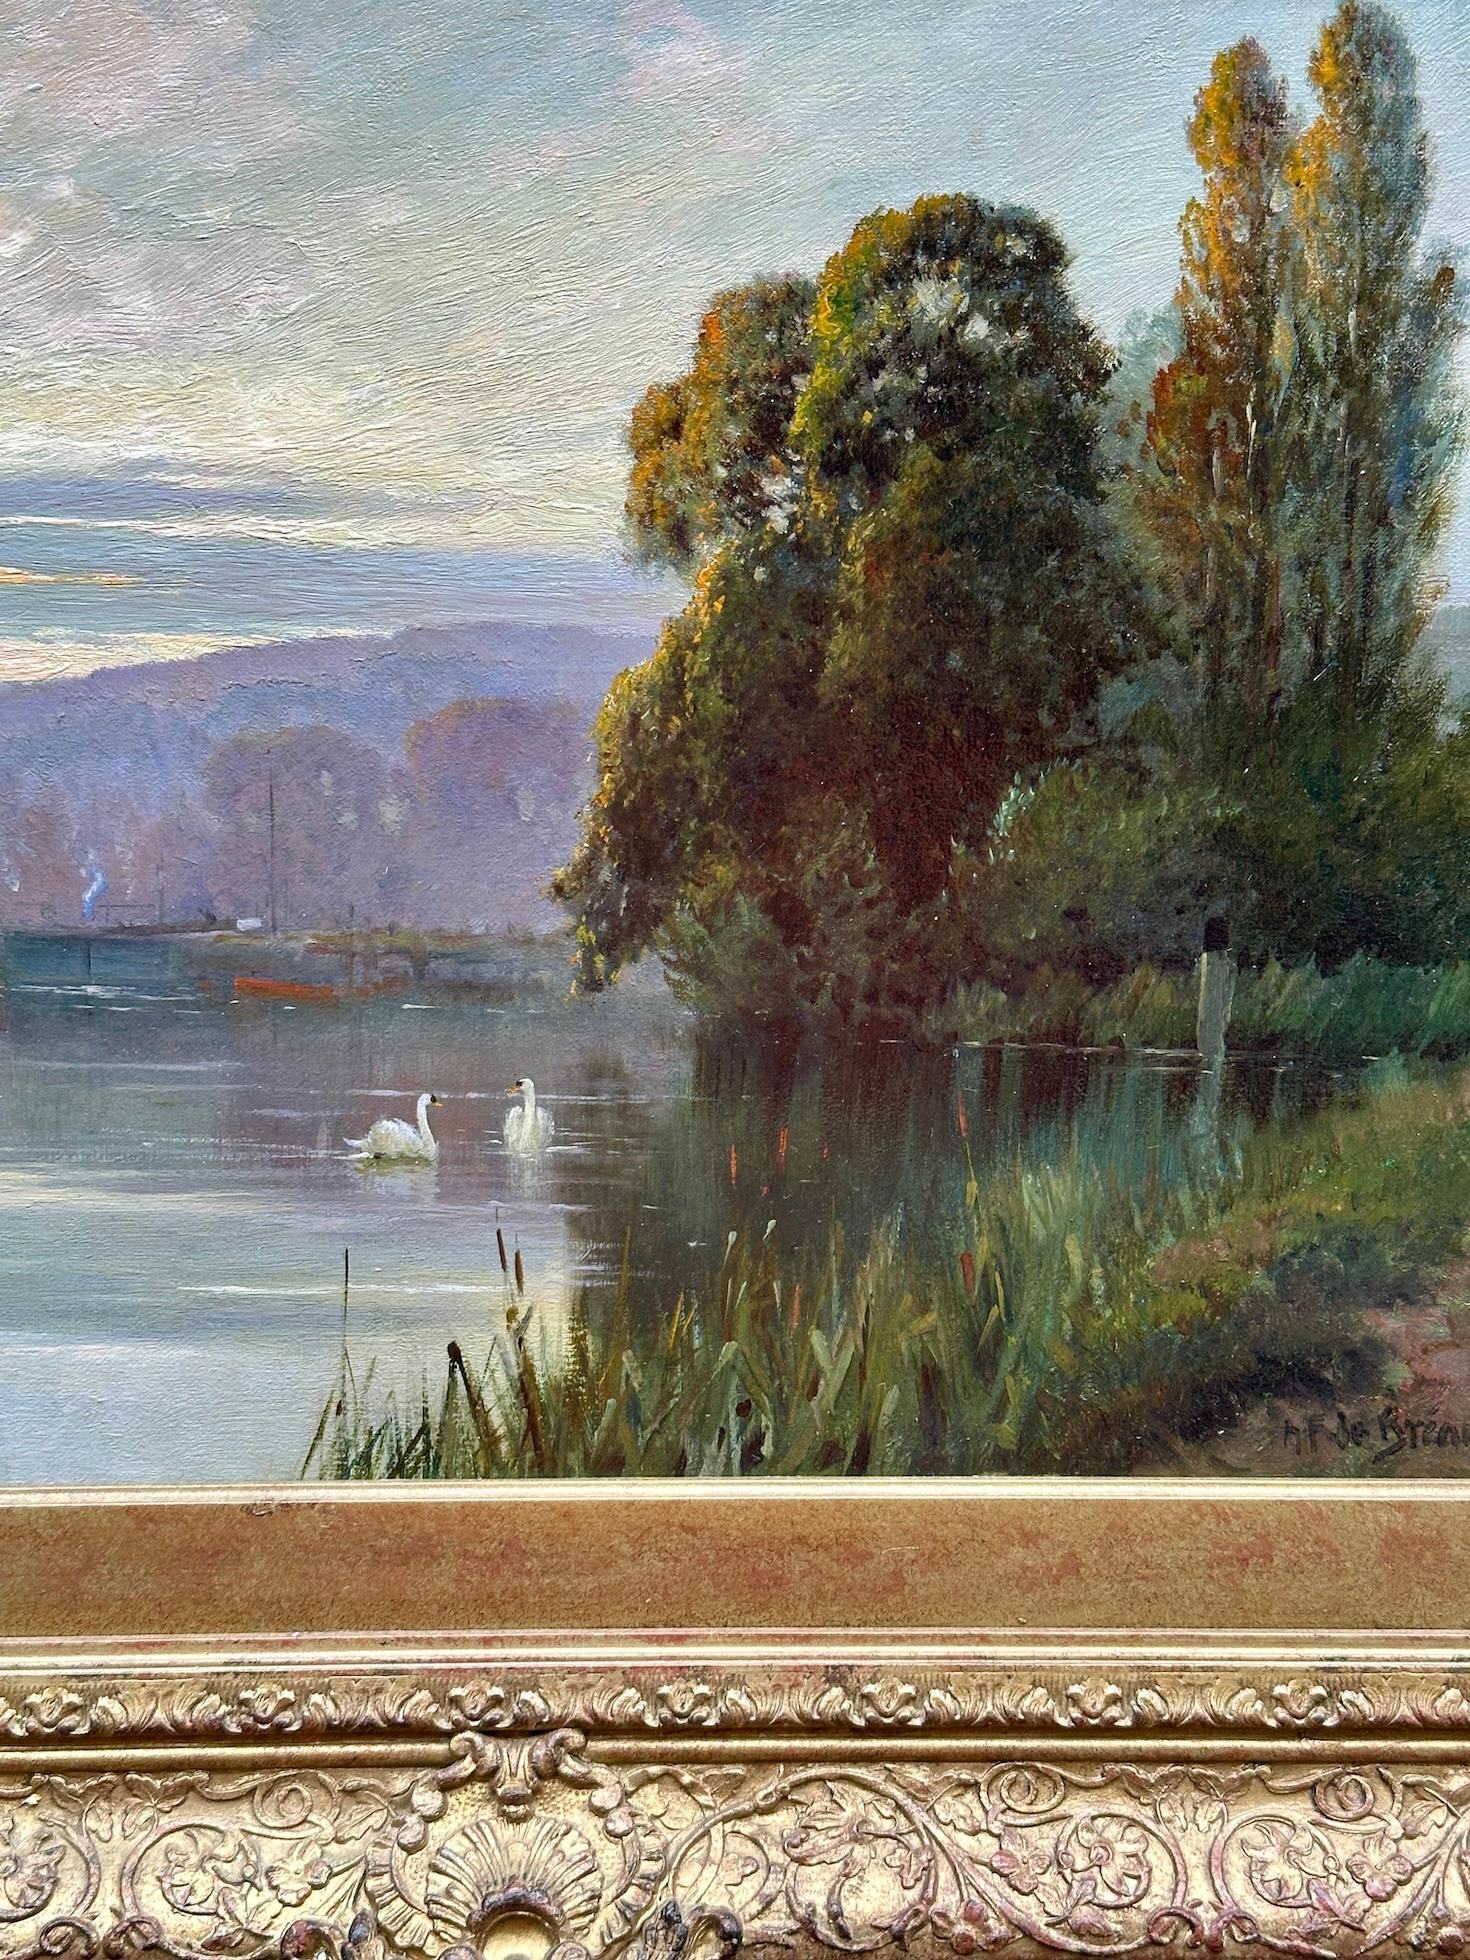 English River landscape, with Swans on the Thames at Temple Lock near London UK - Painting by Alfred de Breanski Jnr.